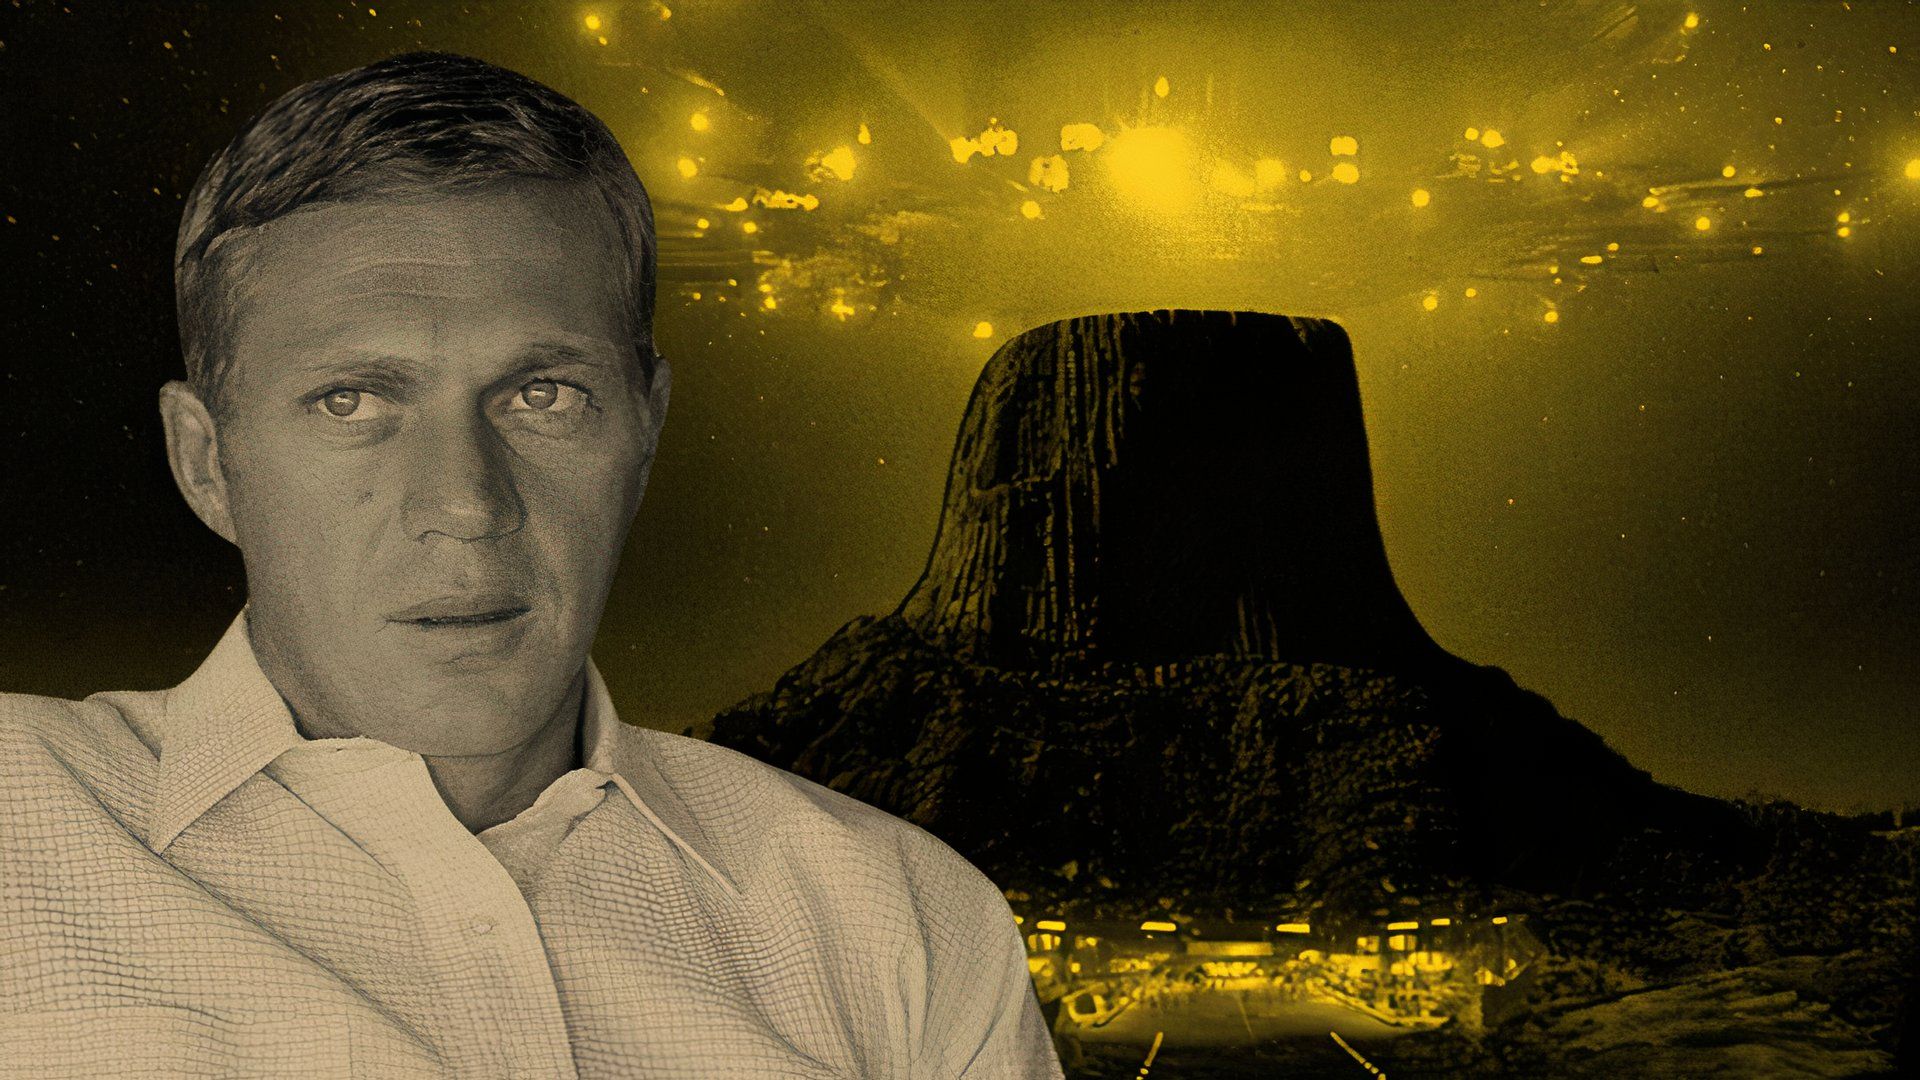 A custom image of Steve McQueen and Close Encounters of the Third Kind